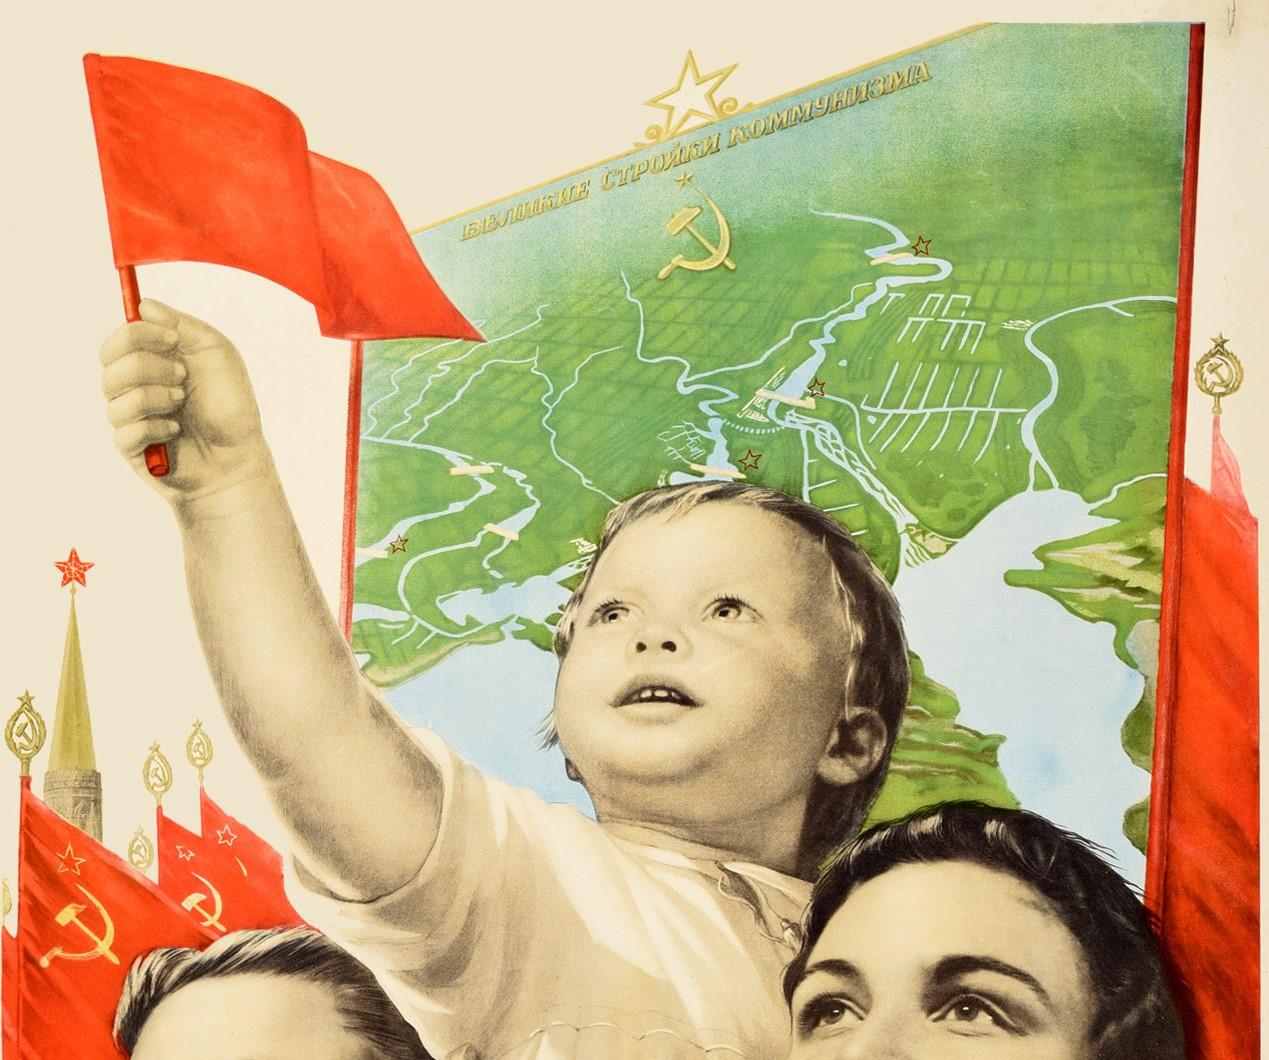 Original vintage Soviet propaganda poster - ?? ?? ???! / We Are For Peace! - featuring a young man and lady holding up a child waving a red flag with crowds behind them singing in front of a tower and large red flags with the hammer and sickle